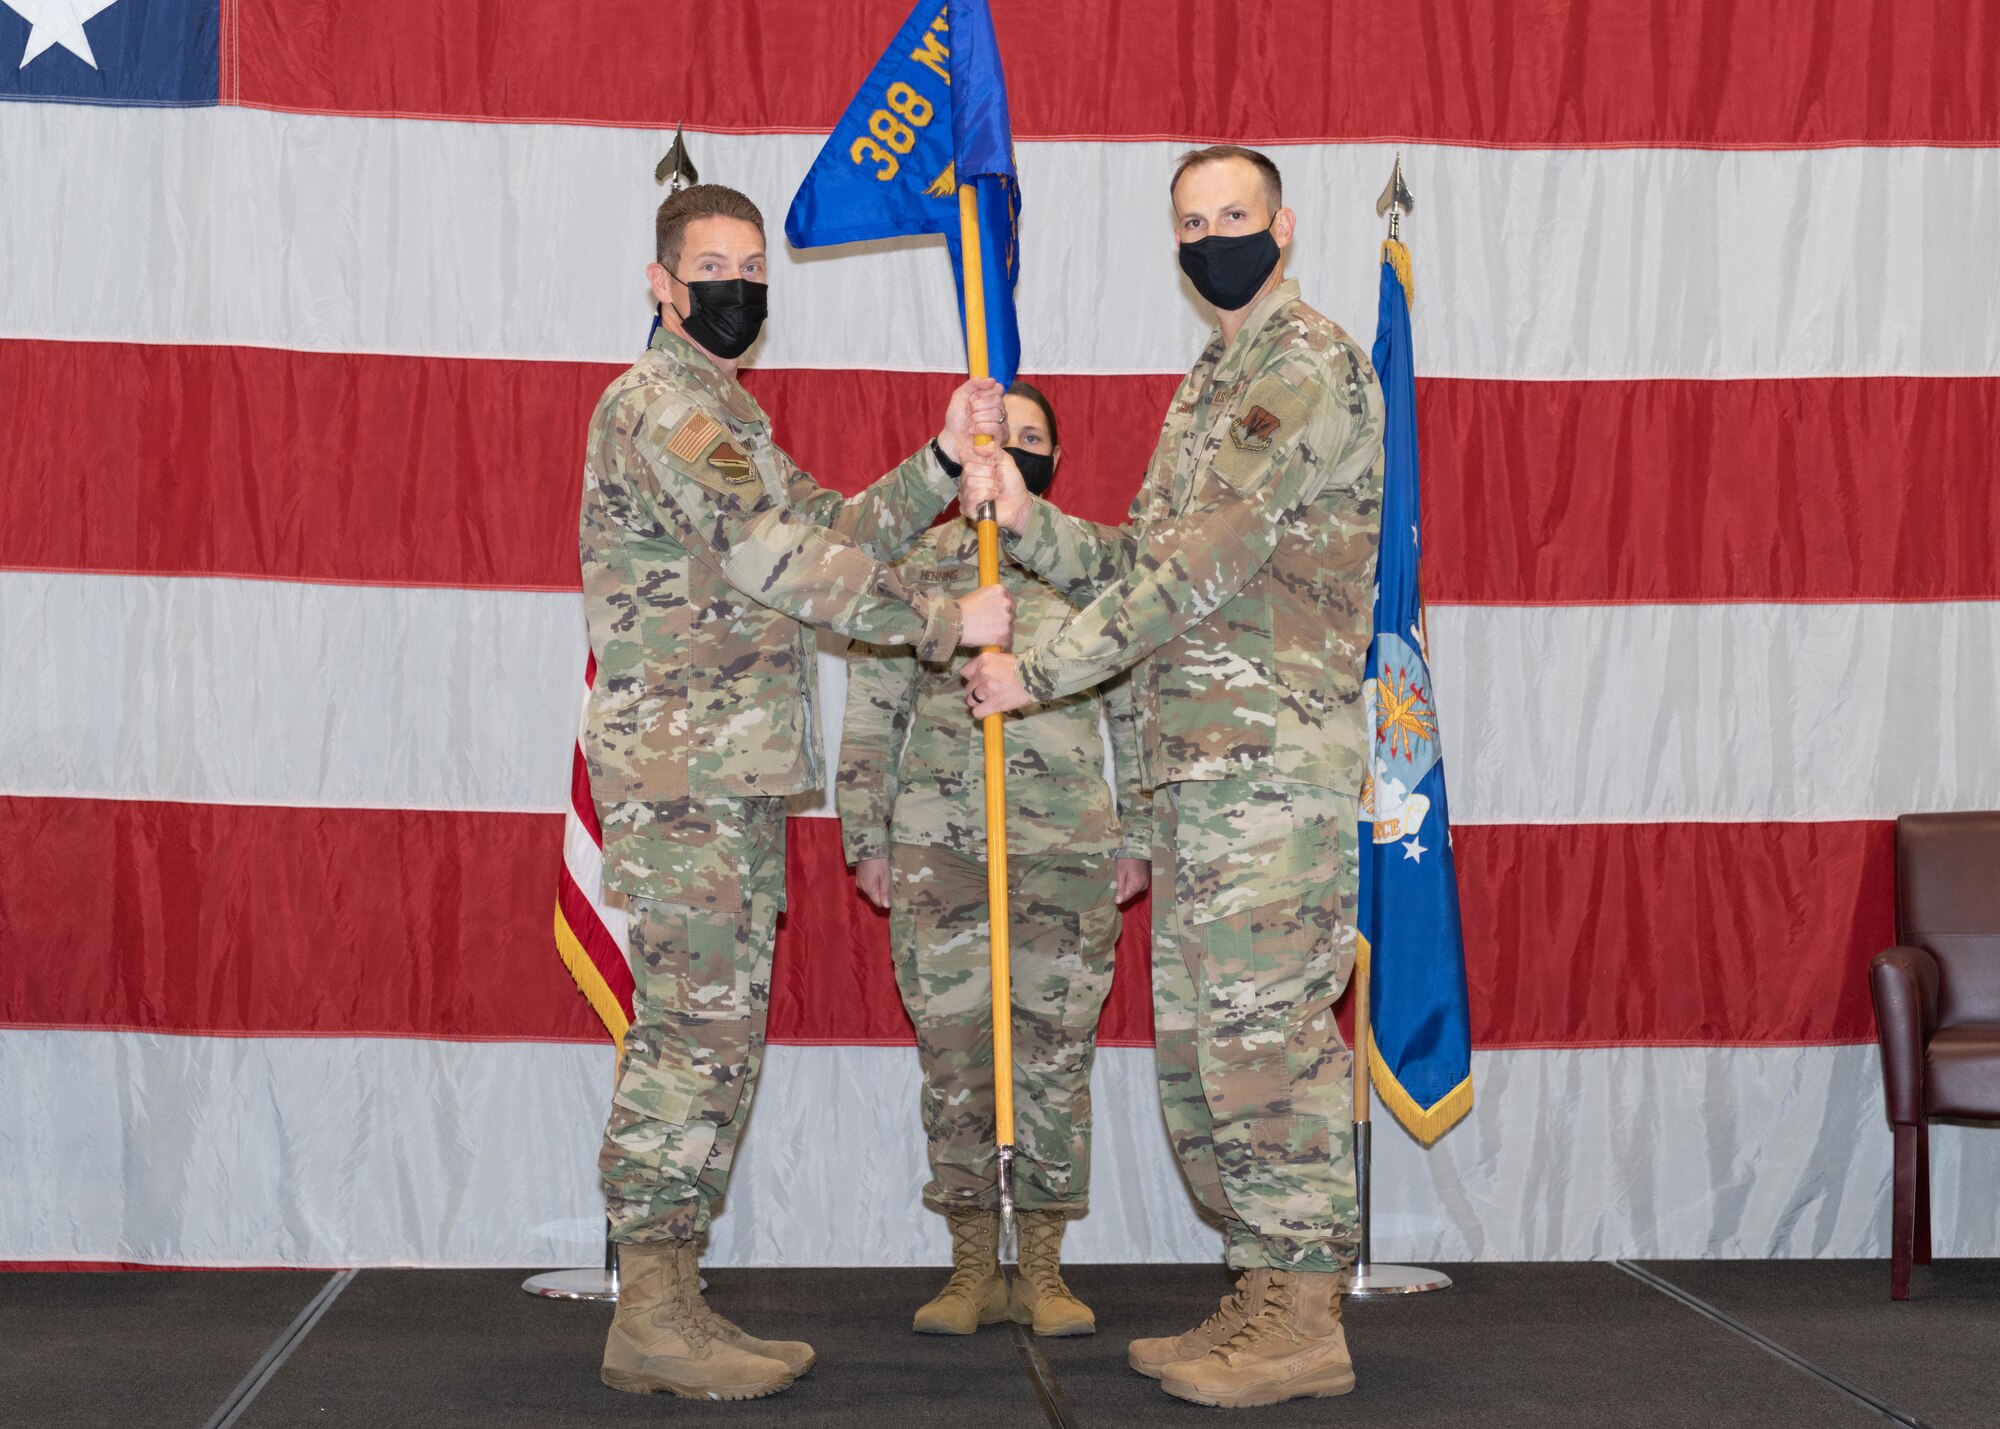 A photo of a change of command ceremony